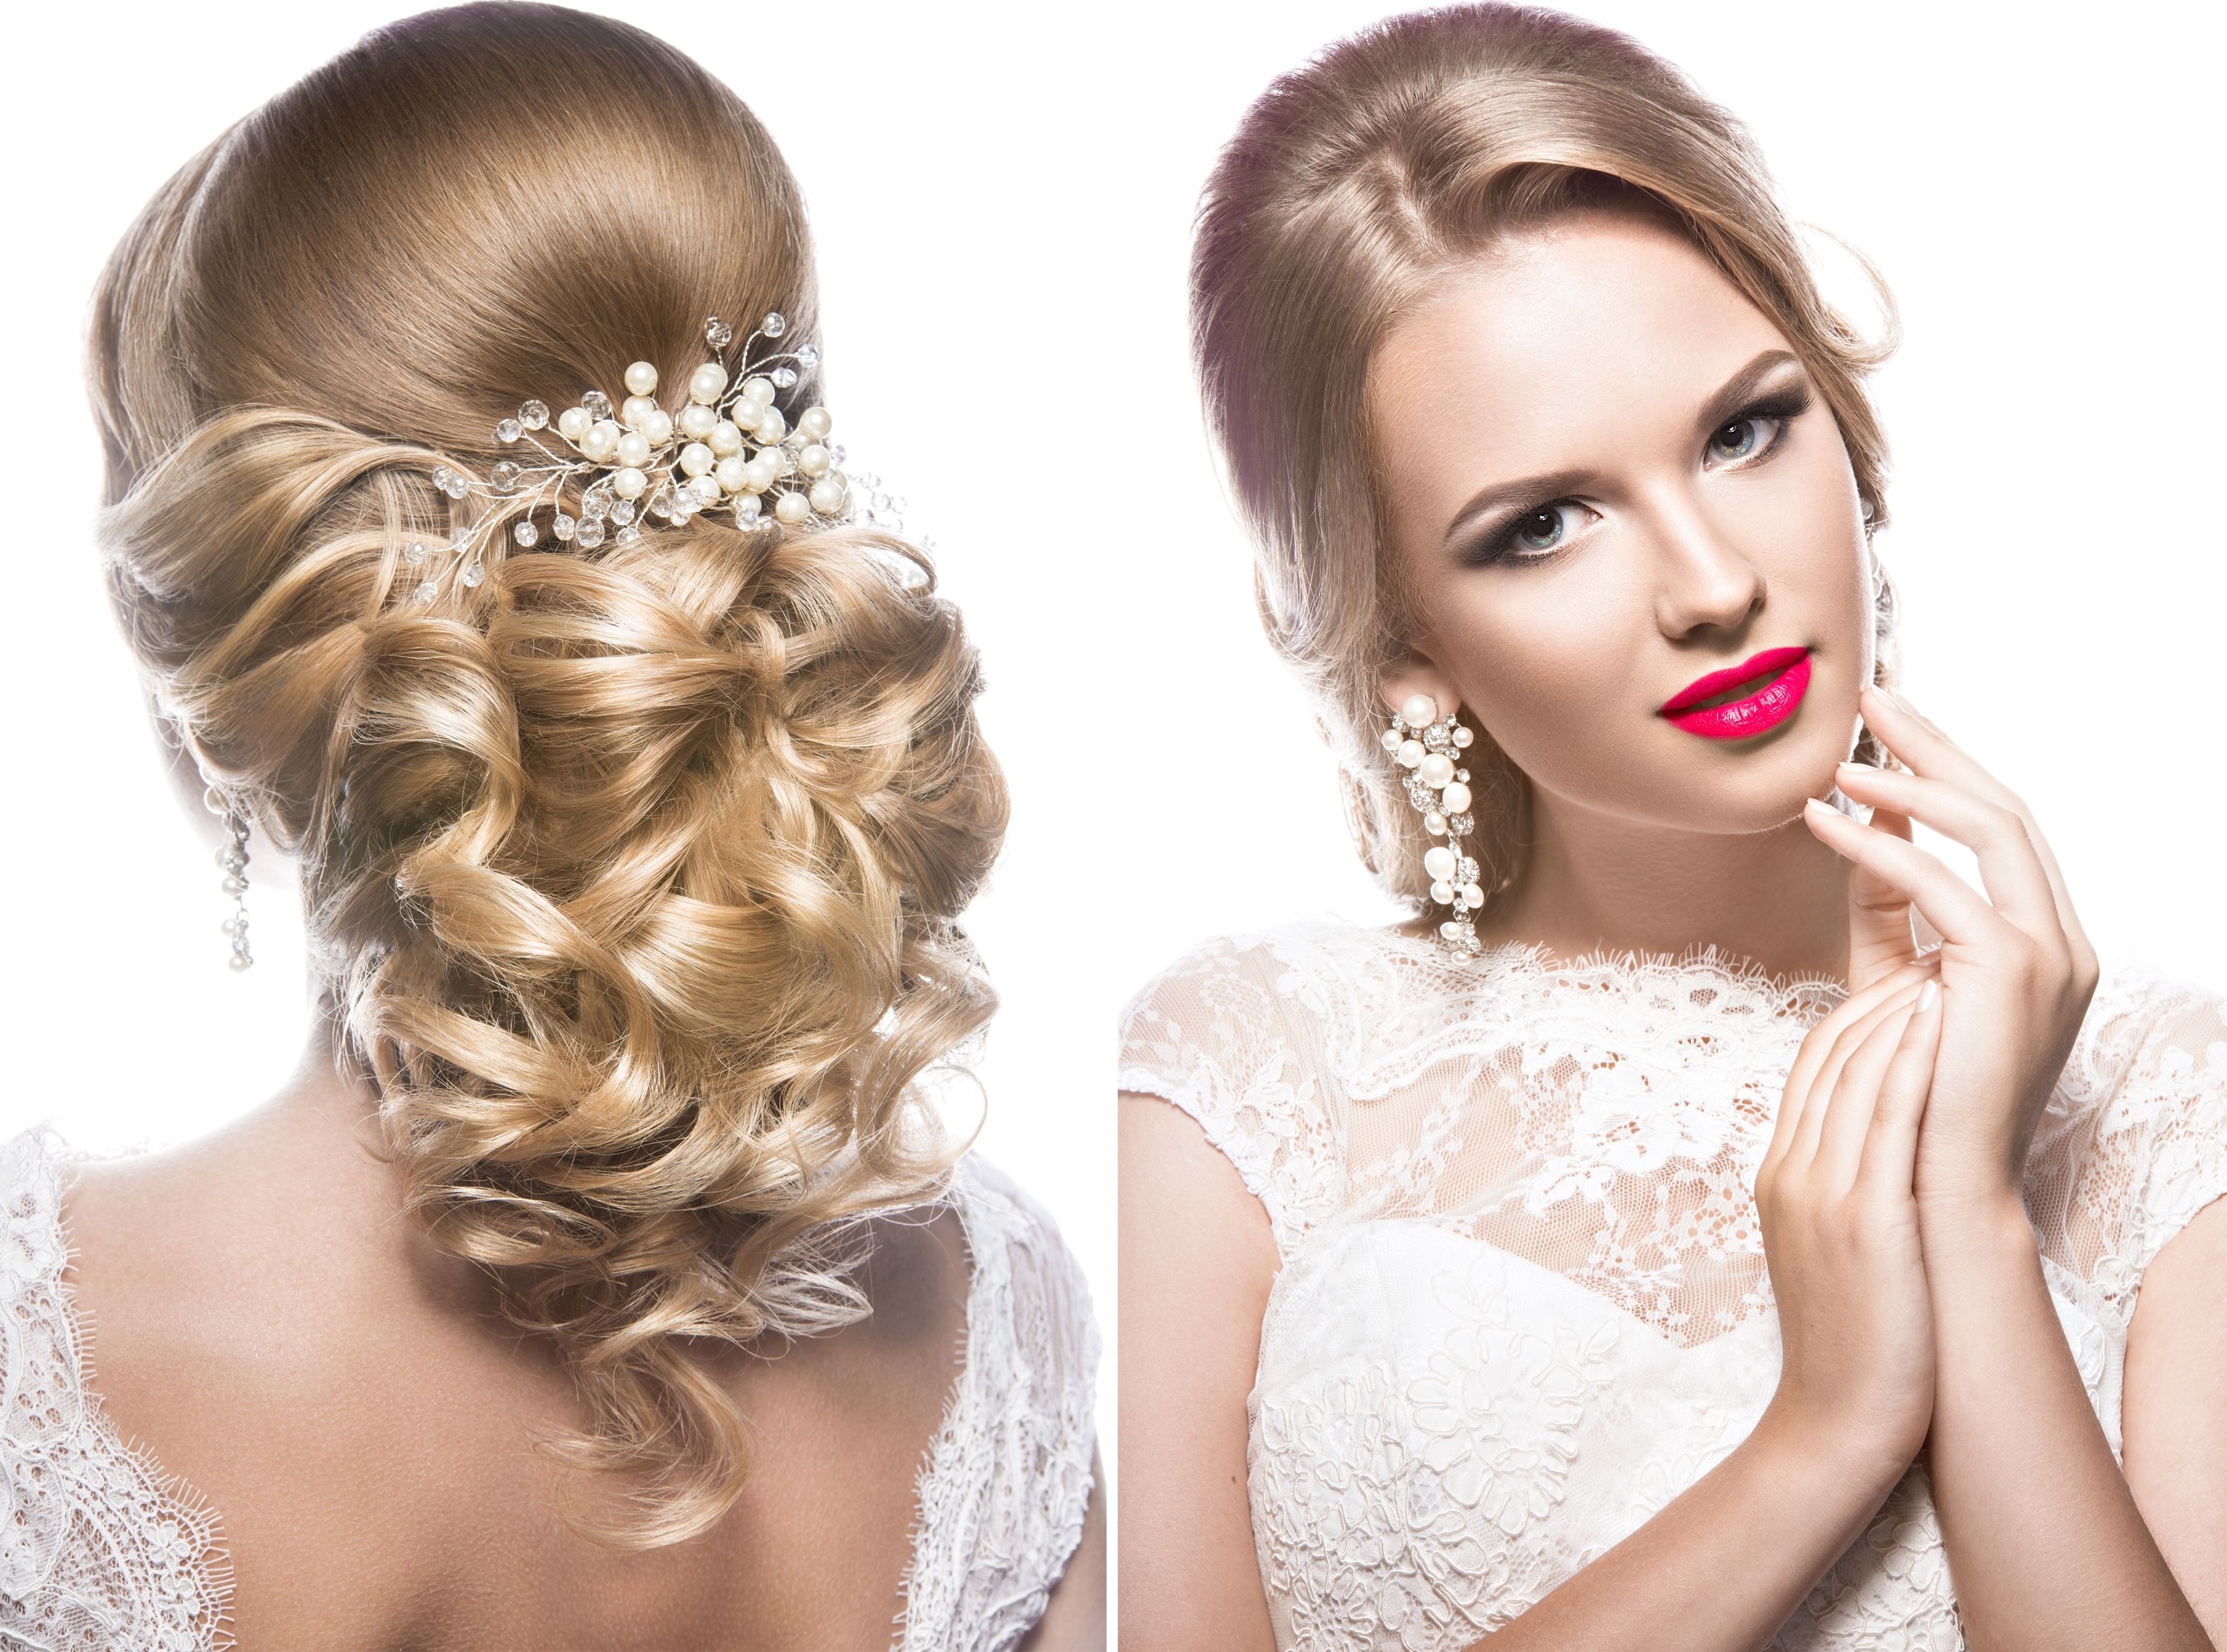 Well Known Wedding Hairstyles That Last All Day Inside How To Get Beautiful Hair On Your Wedding Day With Hair Extensions (View 3 of 15)